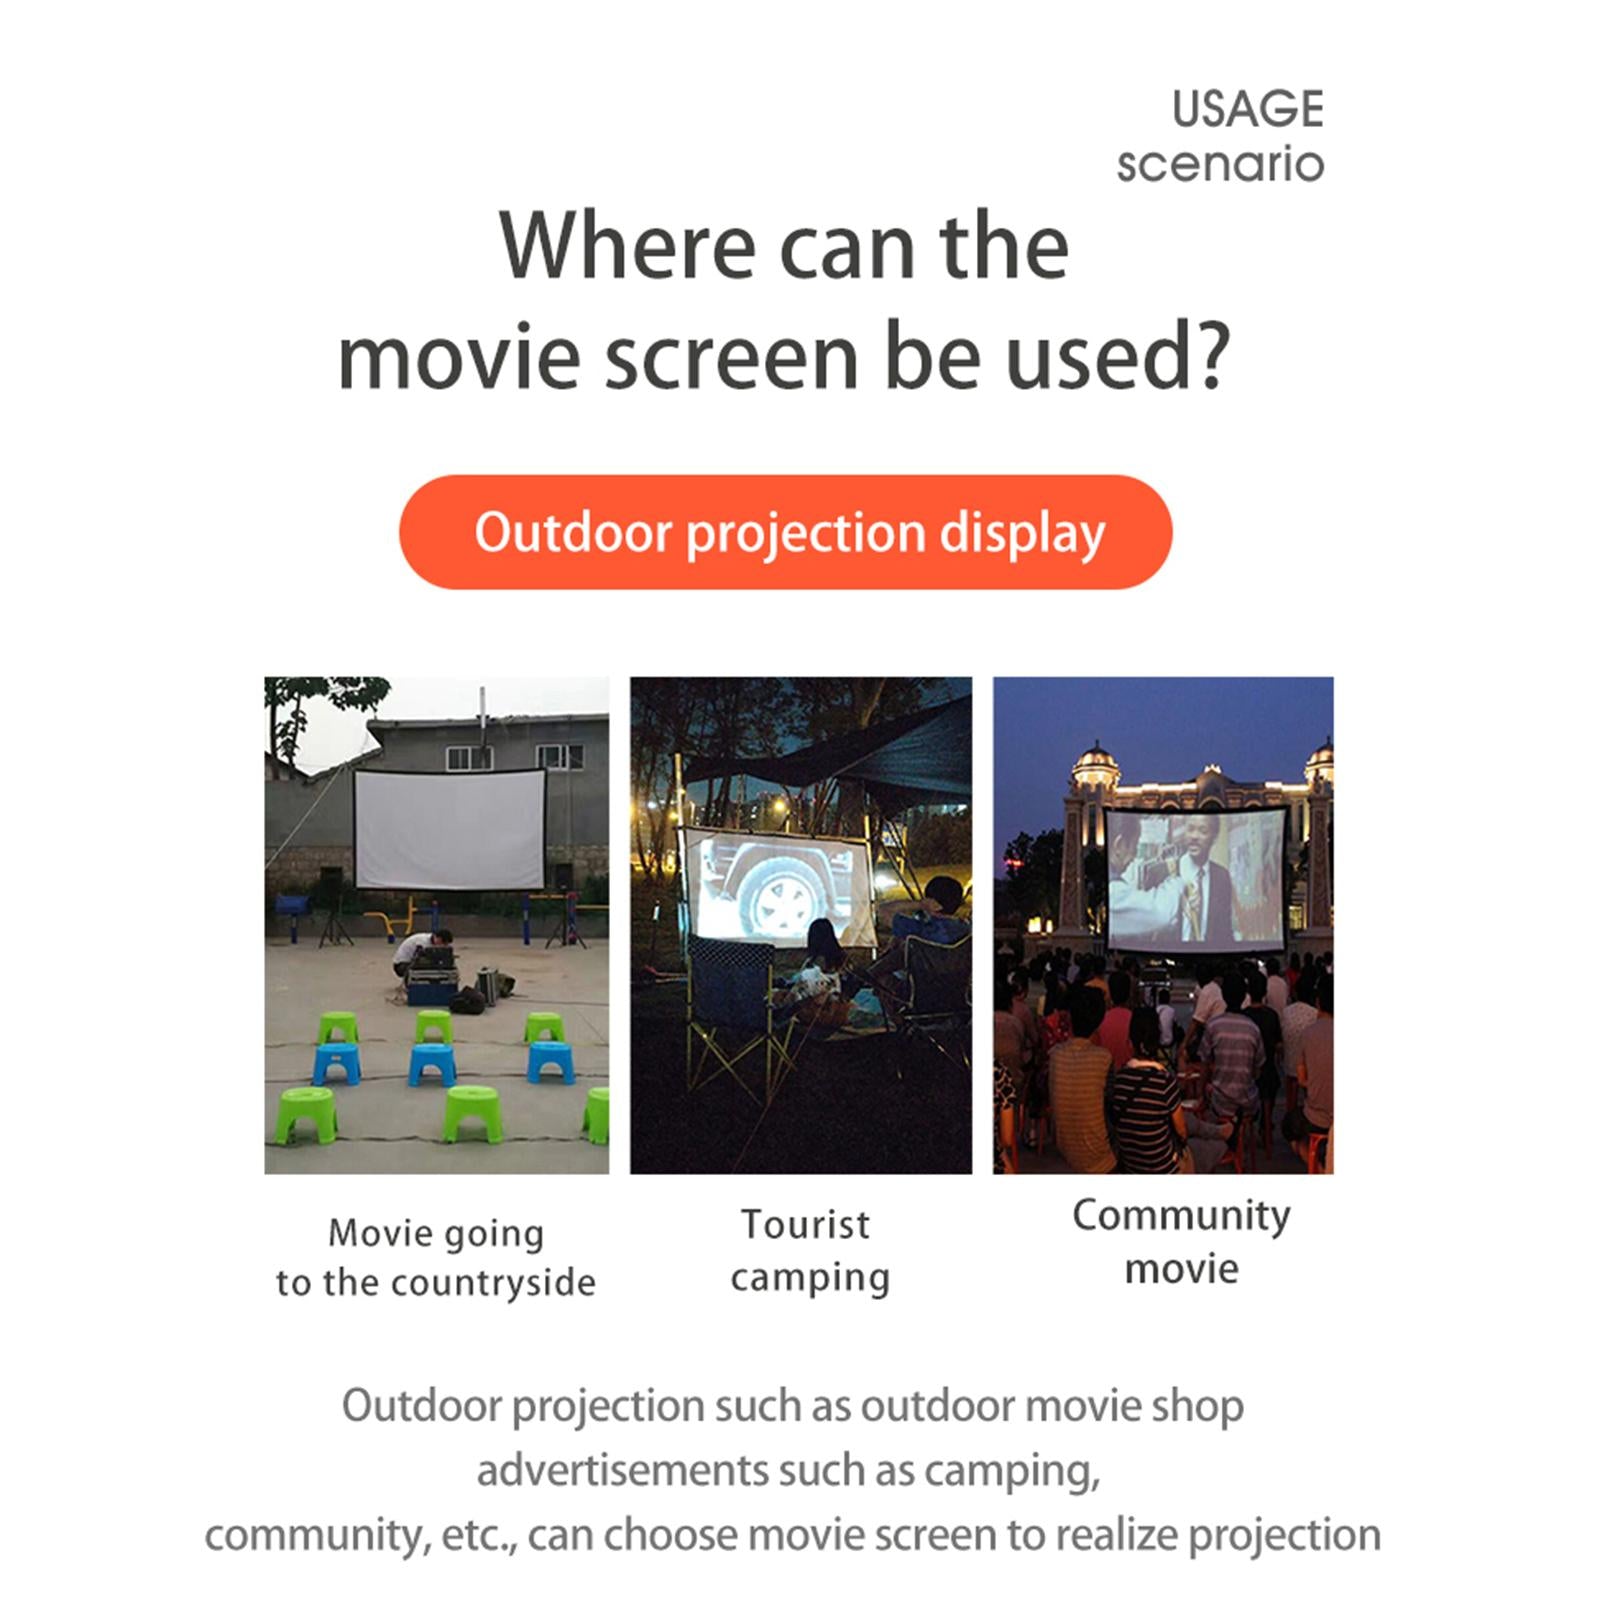 Projector Screen 16:9 HD Foldable Anti-Crease Projection Screen 72 inch